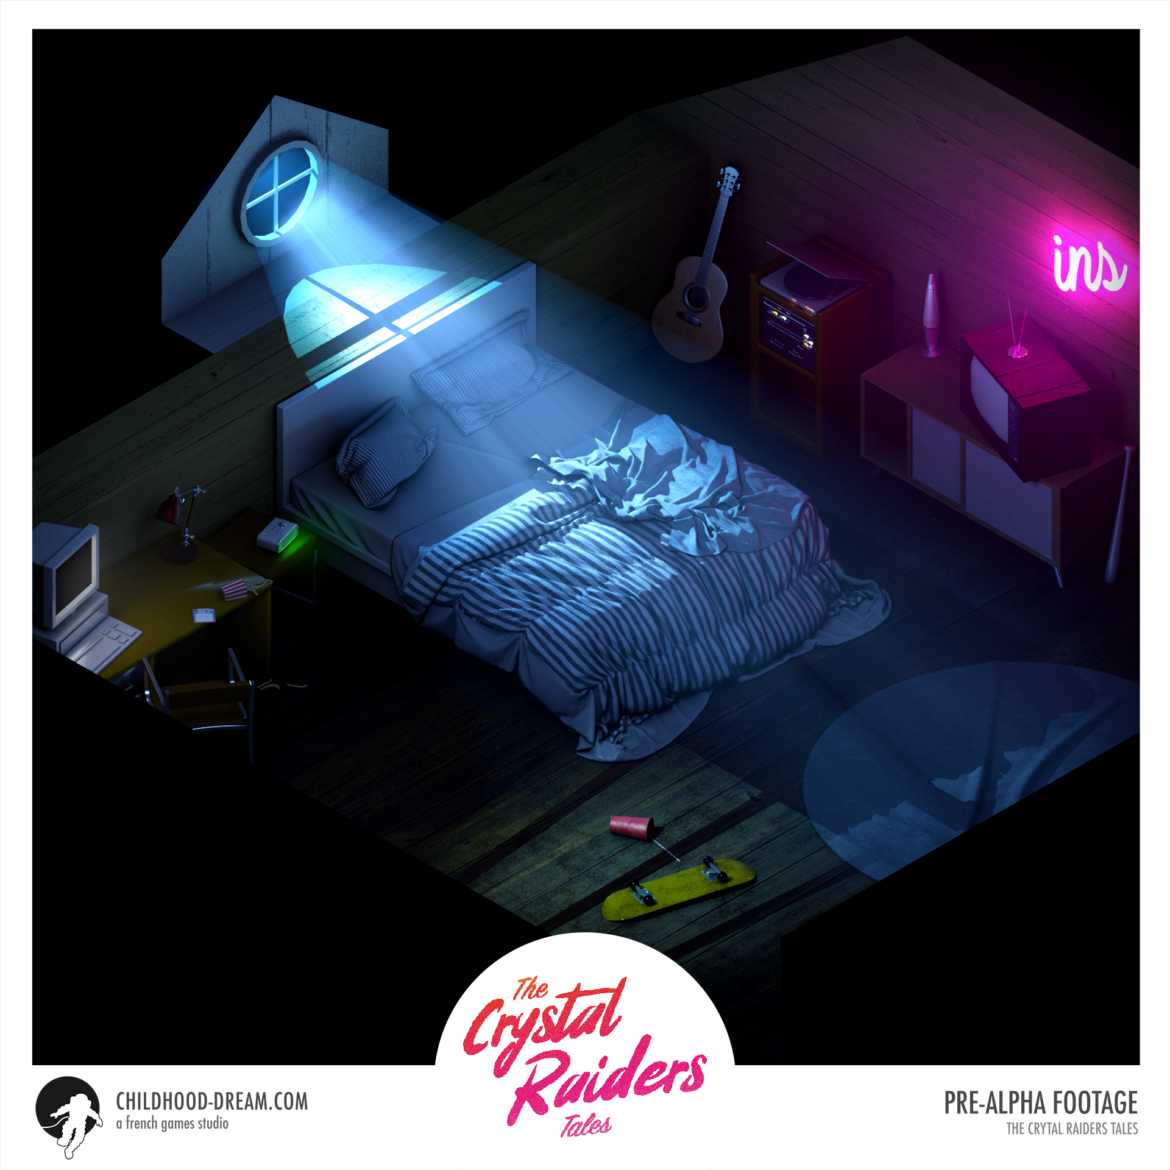 Chambre isometrie, the Crystal Raiders Tales, Bedroom isometric, indiegame, childhood dream, sci-fi, RPG